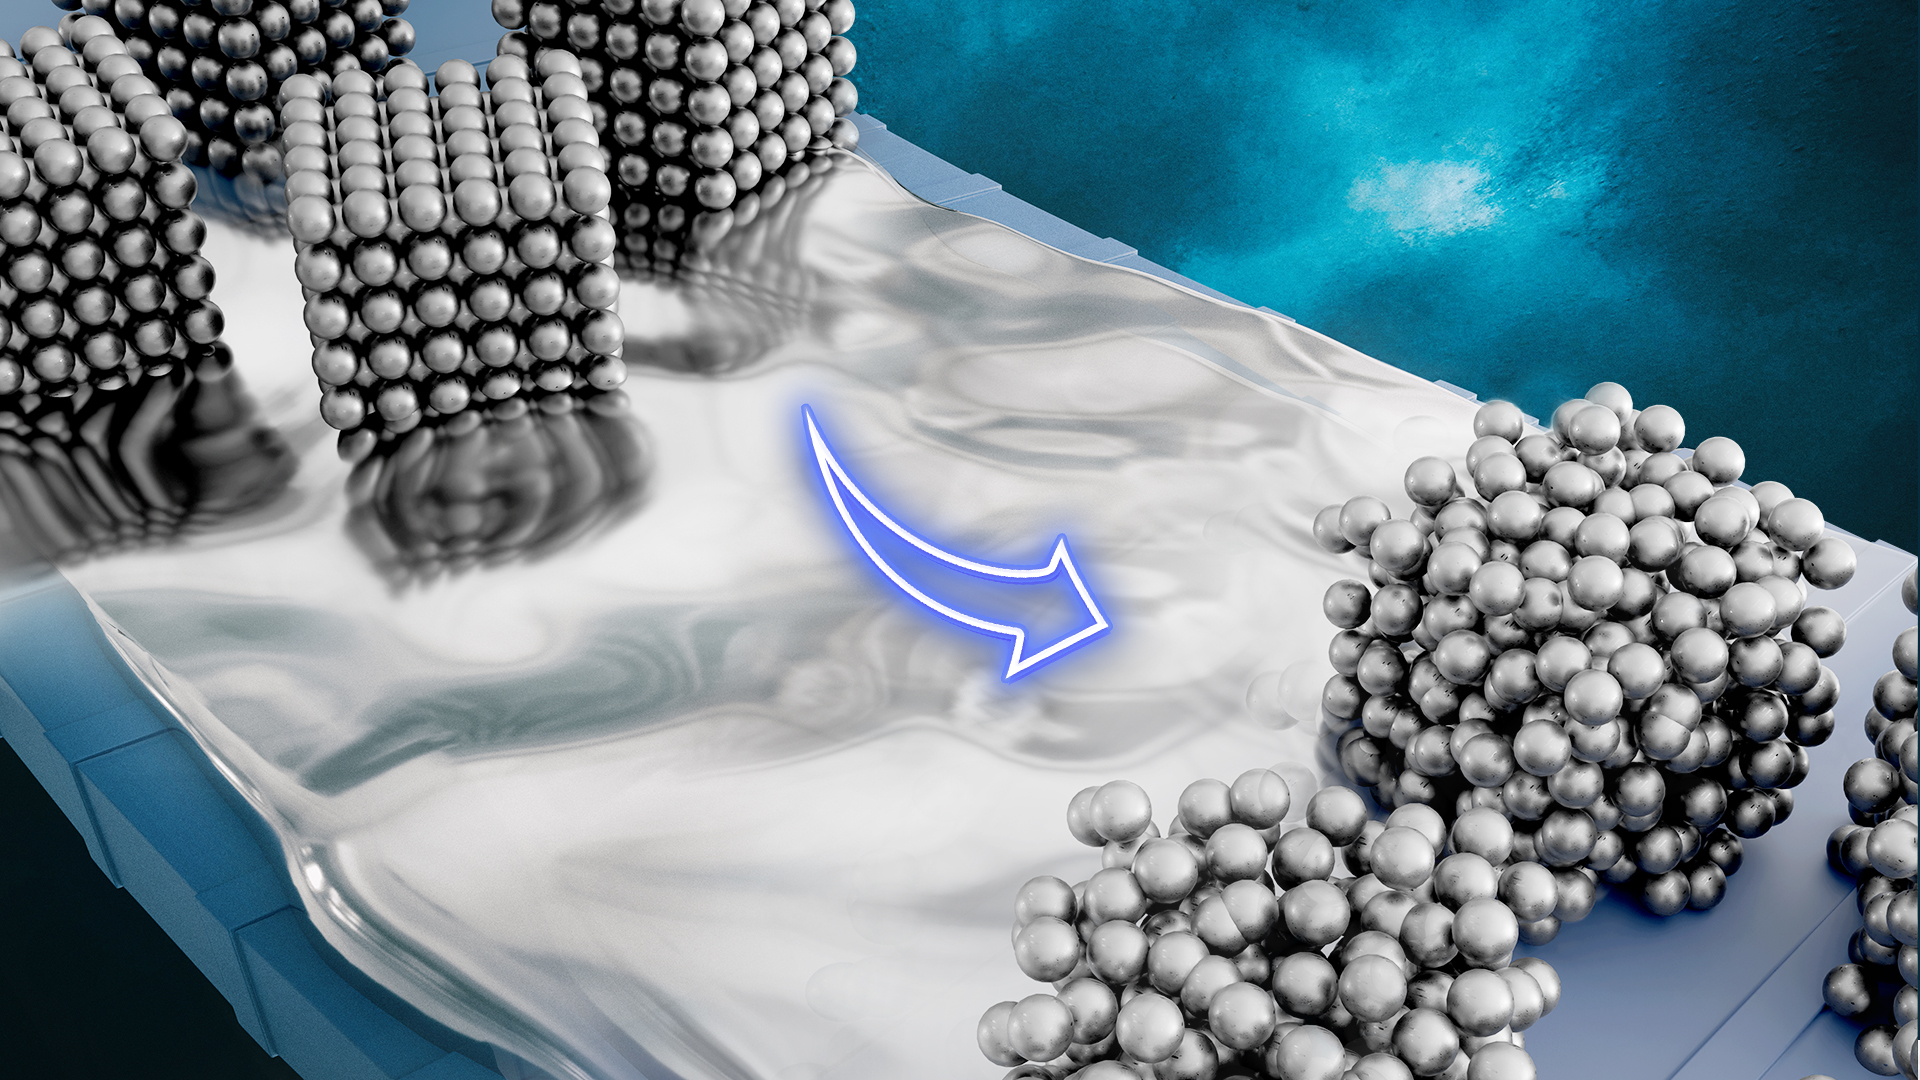 Researchers synthesized single-element amorphous palladium nanoparticles for the first time